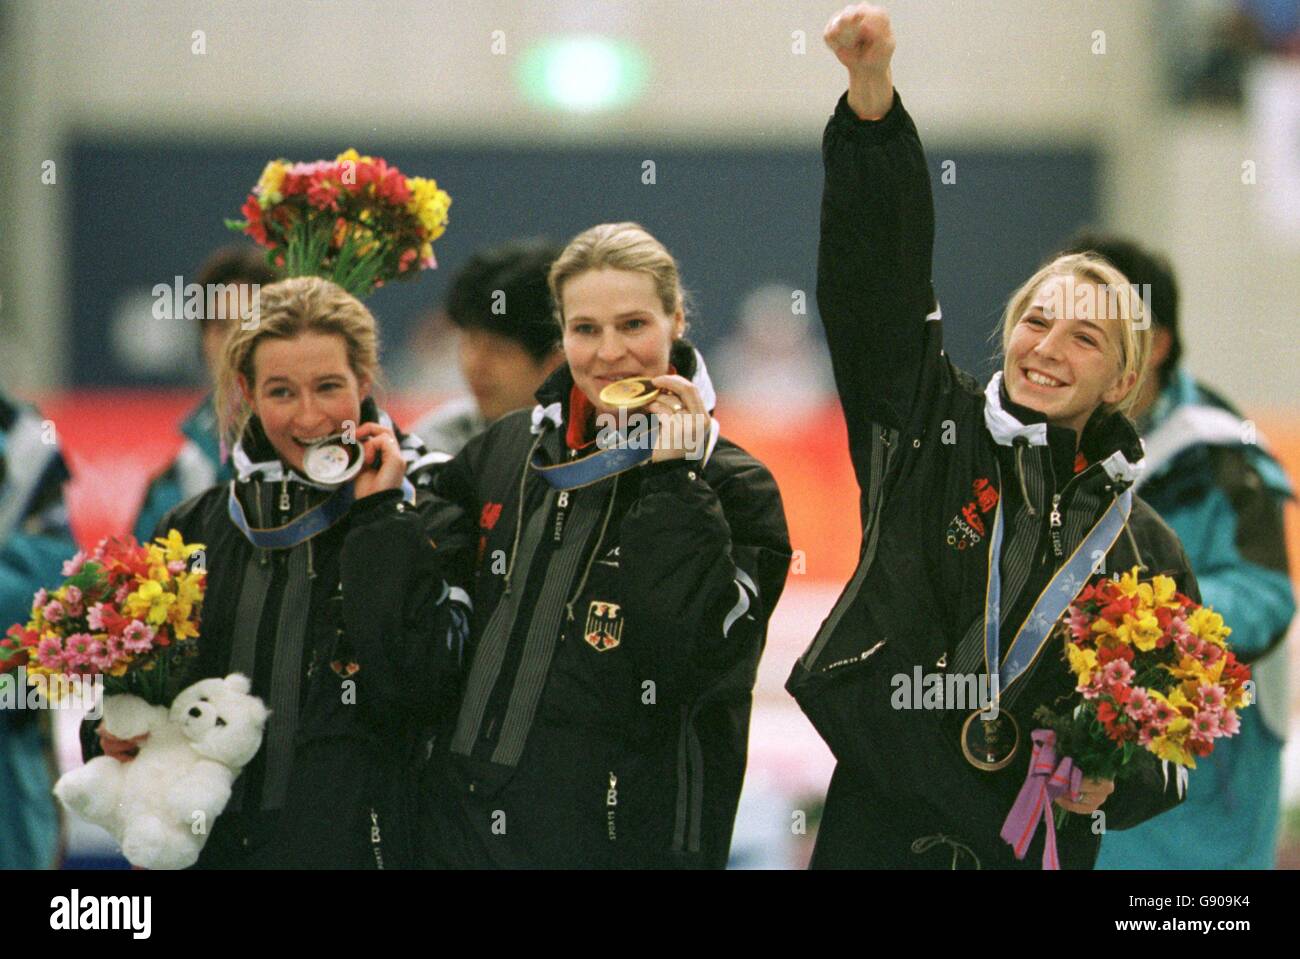 Gunda Niemann Stirnemann (C), Claudia Pechstein (L), and Anna Friesinger (R), Germany, celebrate their success at the Speed Skating competion. Stock Photo